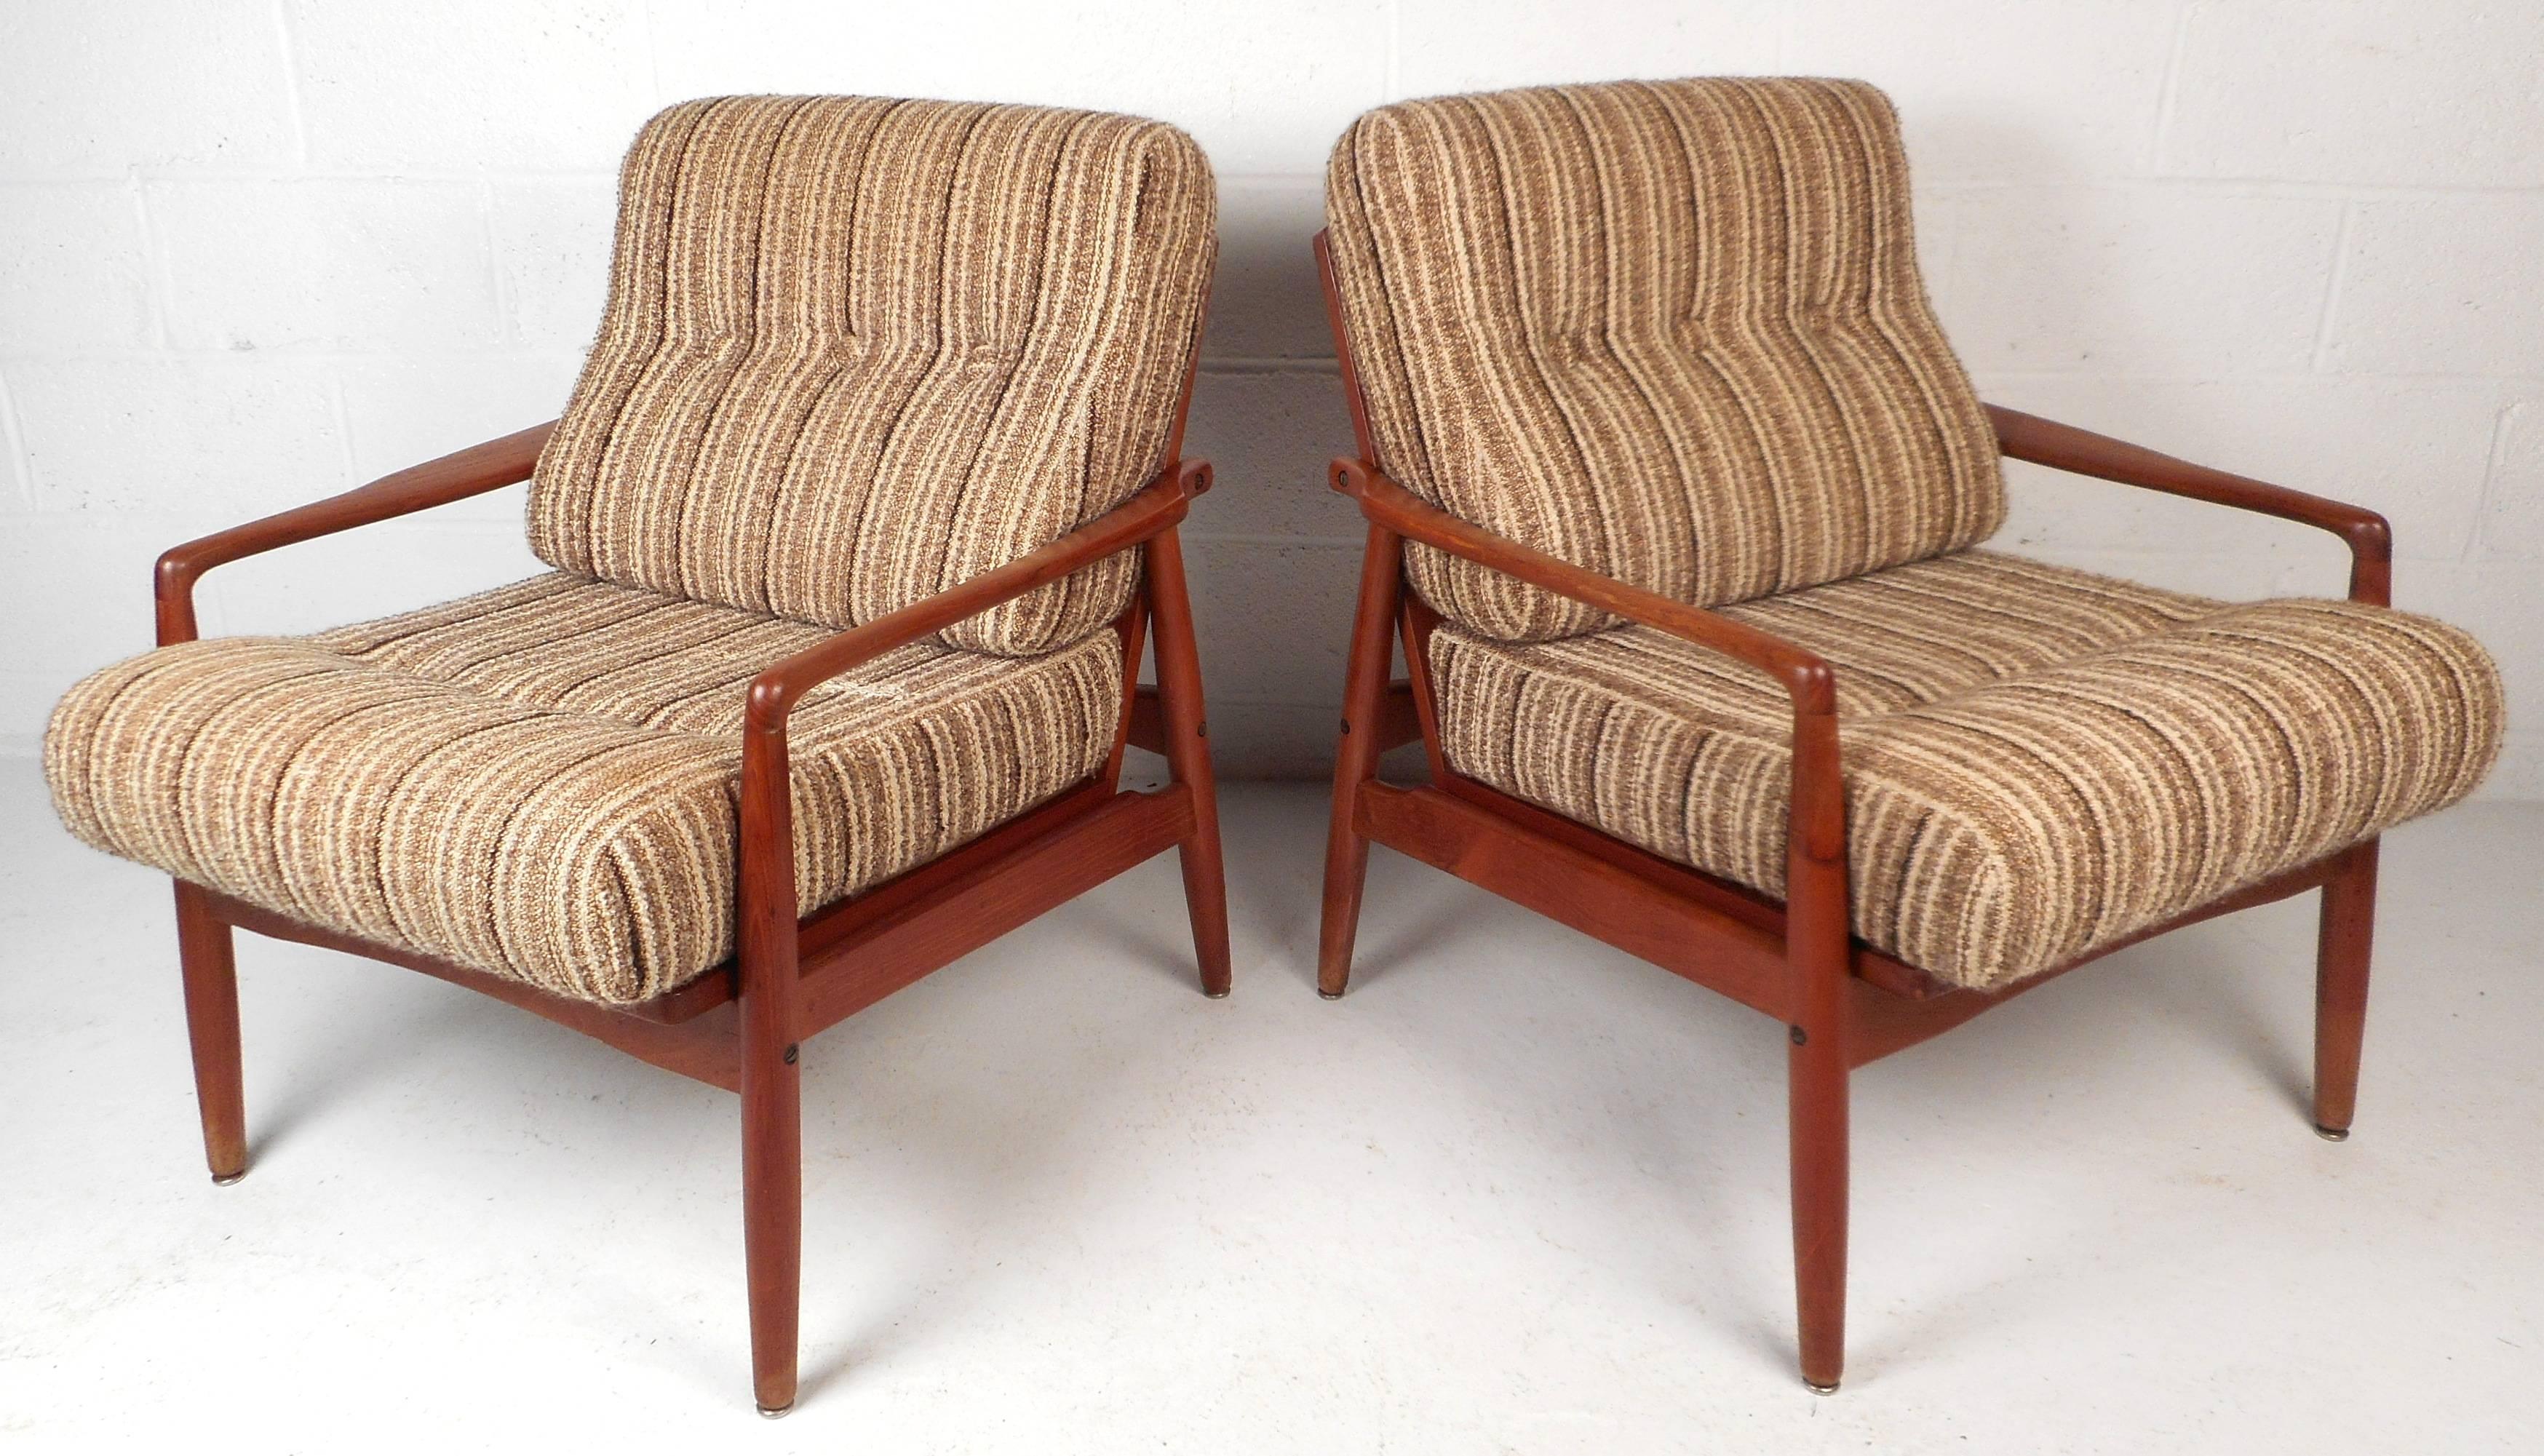 Gorgeous Mid-Century Modern pair of Danish lounge chairs with a vintage teak finish. Stylish and sturdy design with unique sculpted armrests. Beautiful upholstery, thick cushions, and wide seating offer comfort in any modern interior. Made in